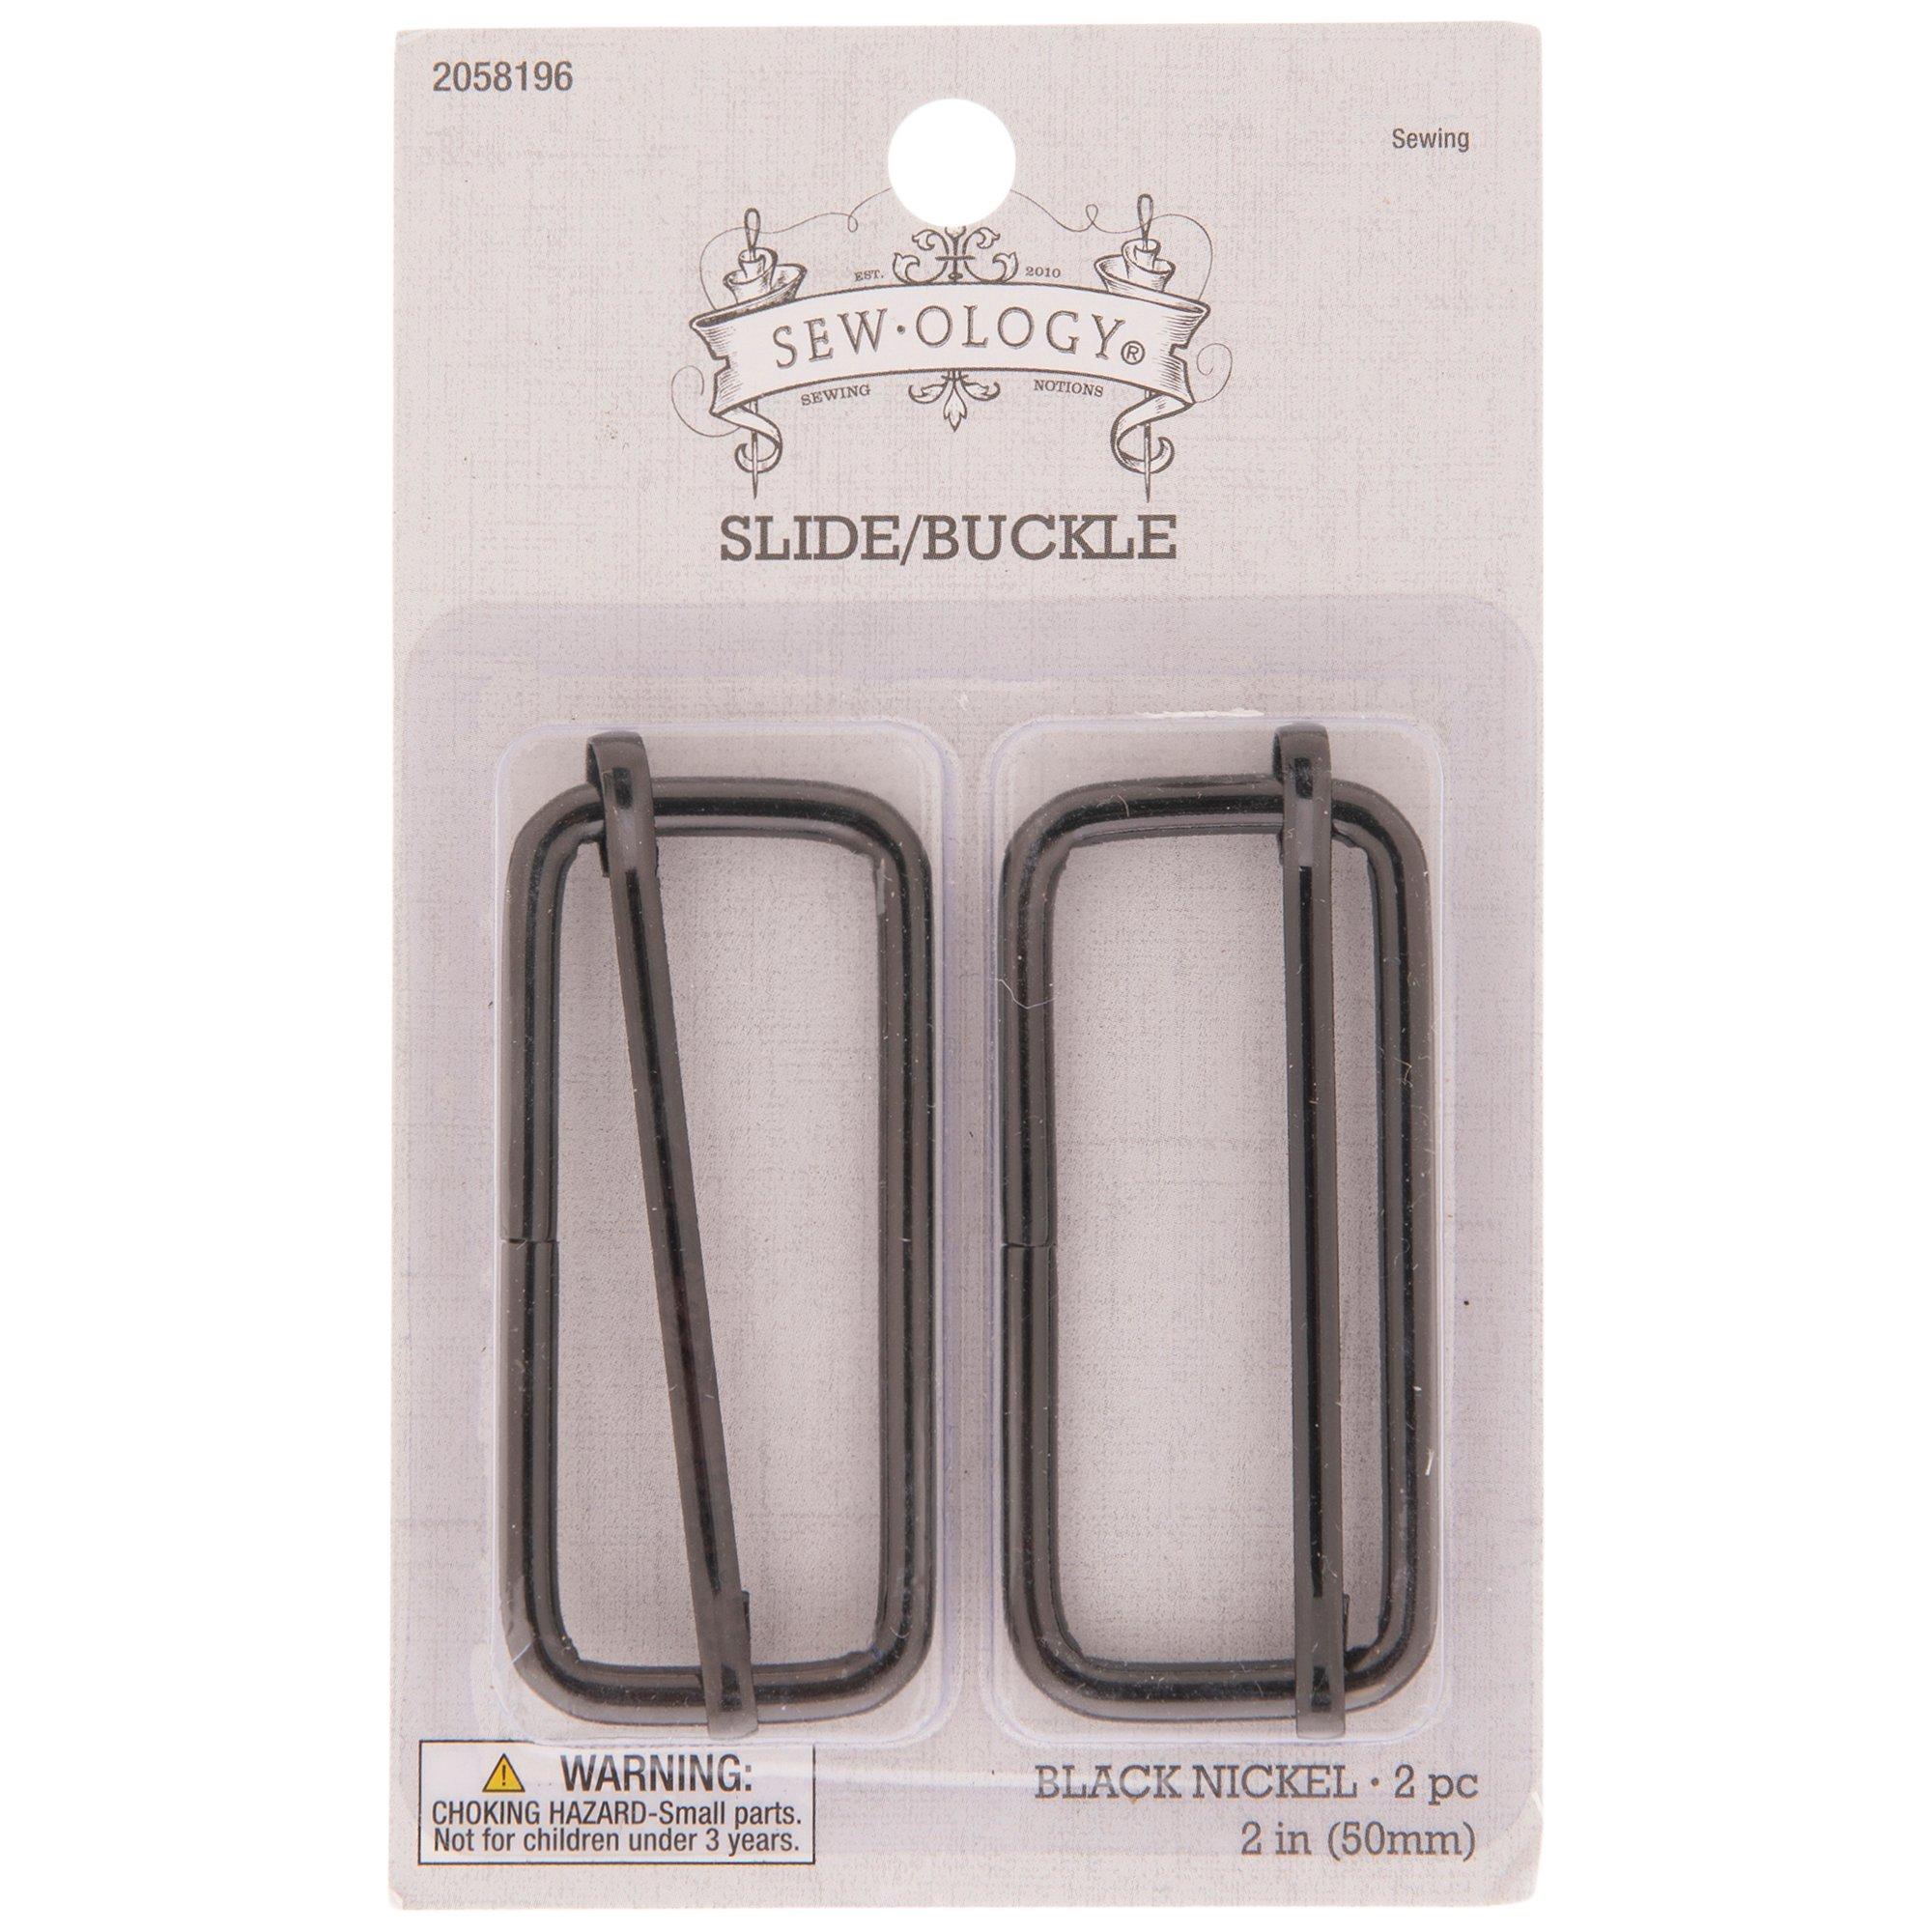 LINASHI Durable Iron Overall Buckle 10pcs Overall Buckles Easy to Install  Adjustable Slide Buckles Convenient Shoulder Strap Buckles Diy Sewing  Accessories 